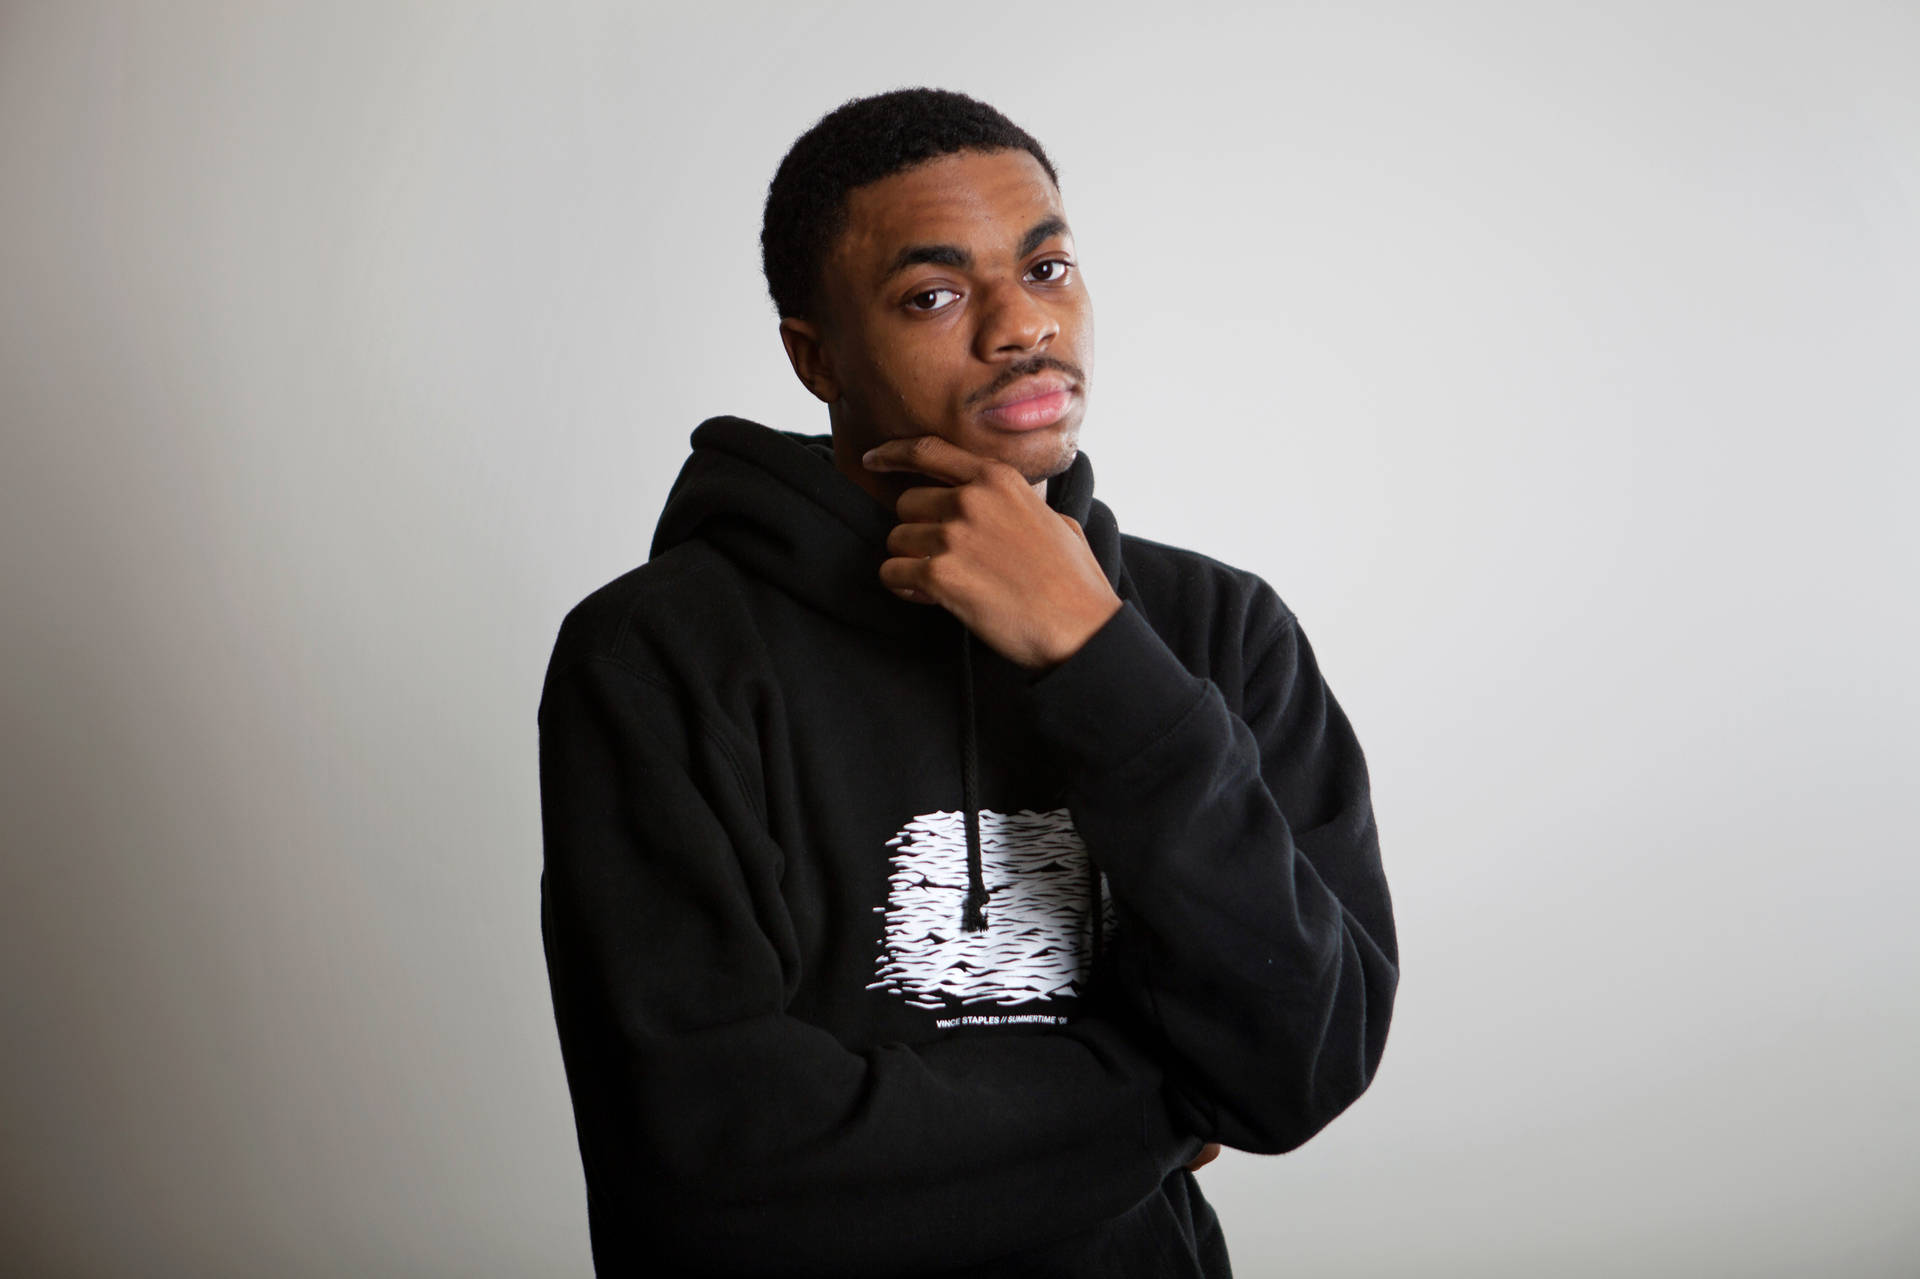 Top 999 Vince Staples Wallpaper Full HD 4K Free to Use